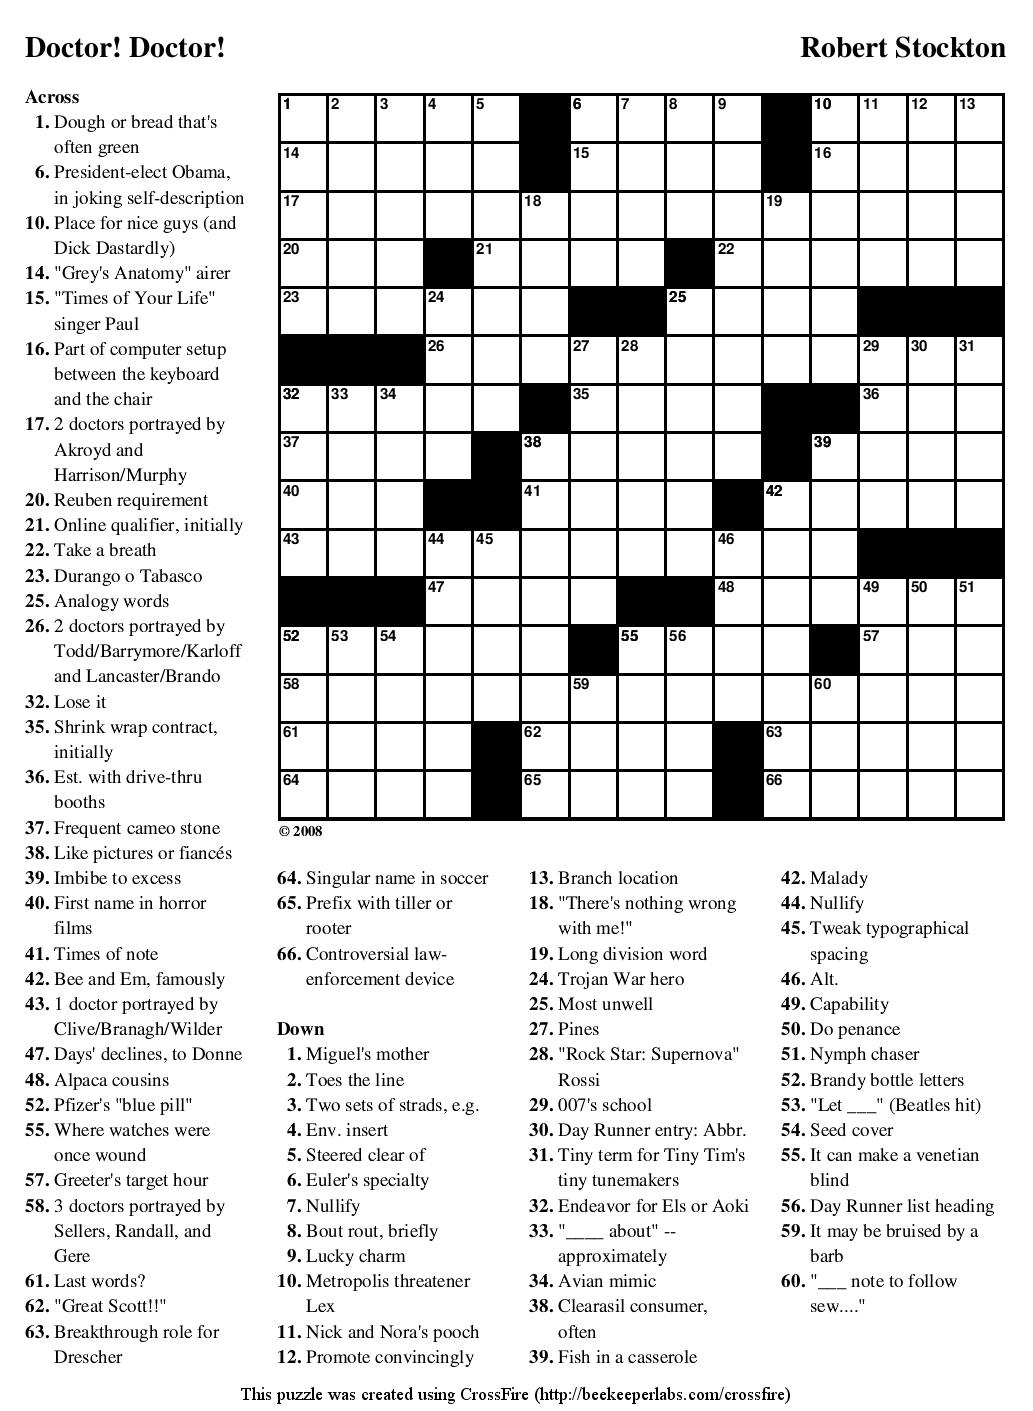 Crossword Puzzles Printable - Yahoo Image Search Results | Crossword - Crossword Puzzle Maker Printable